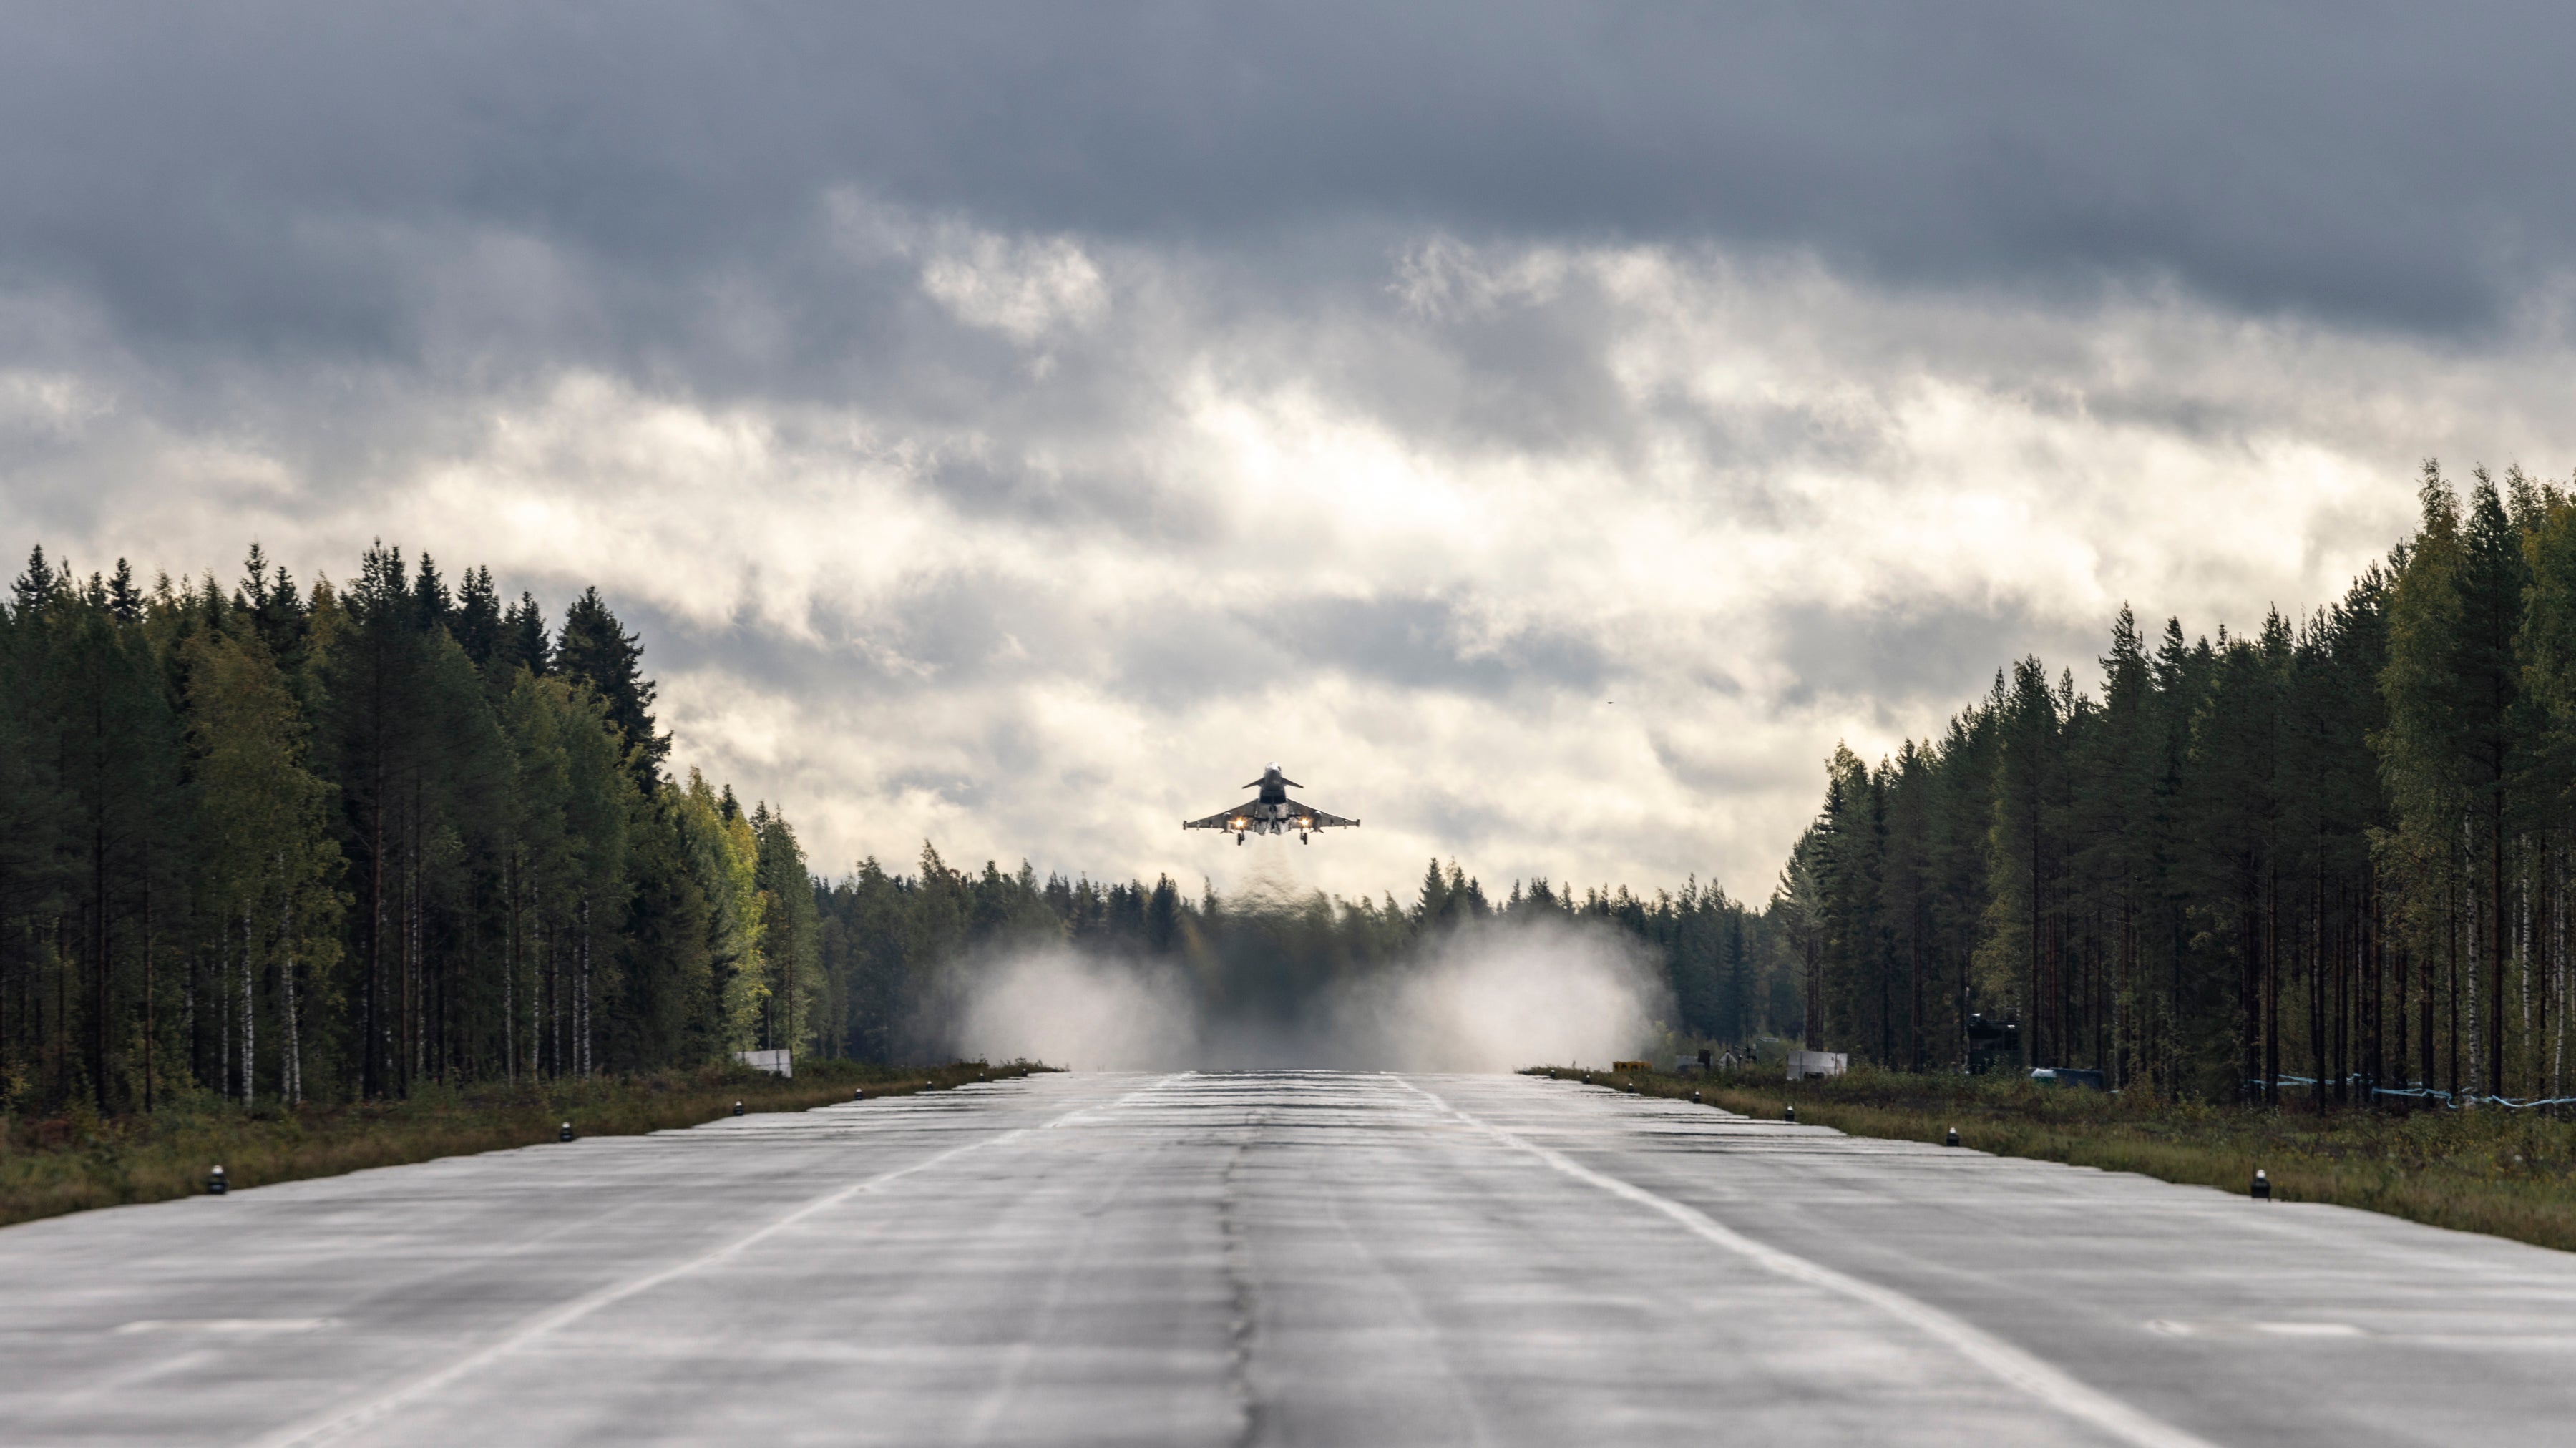 The road is usually used for normal traffic, but has been specially designated to serve as an emergency landing strip to sustain aircraft activity if required